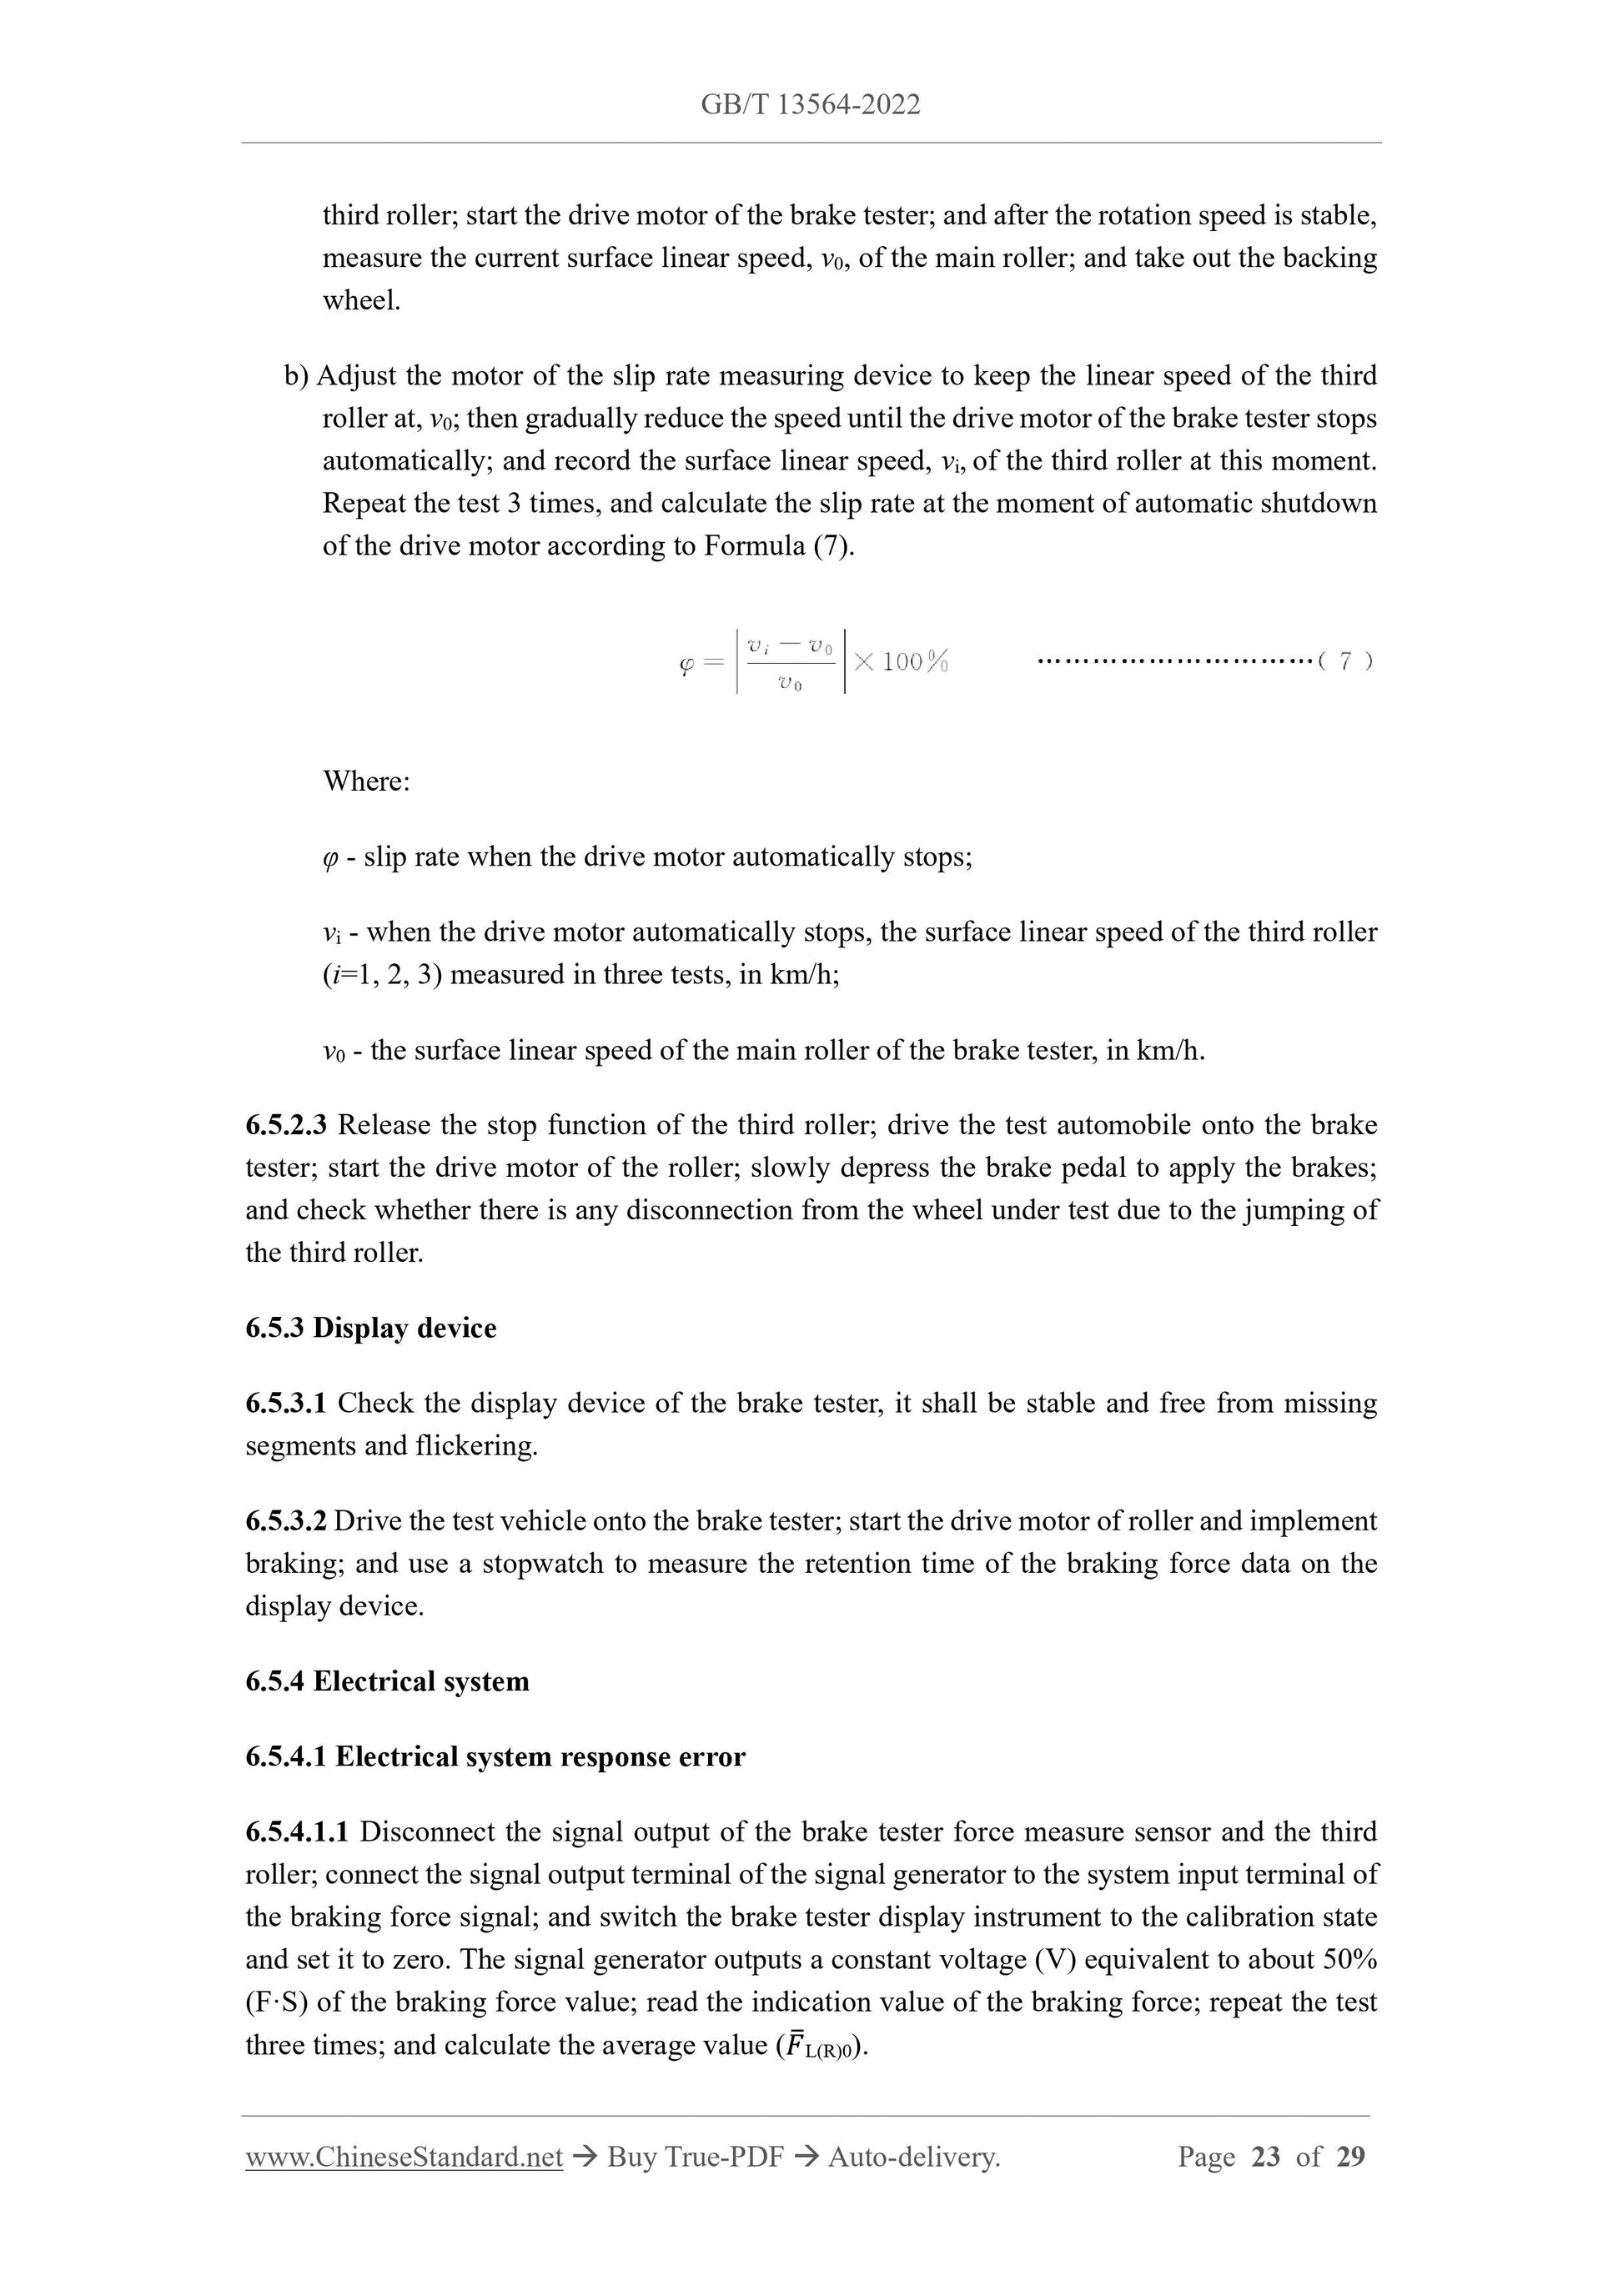 GB/T 13564-2022 Page 8